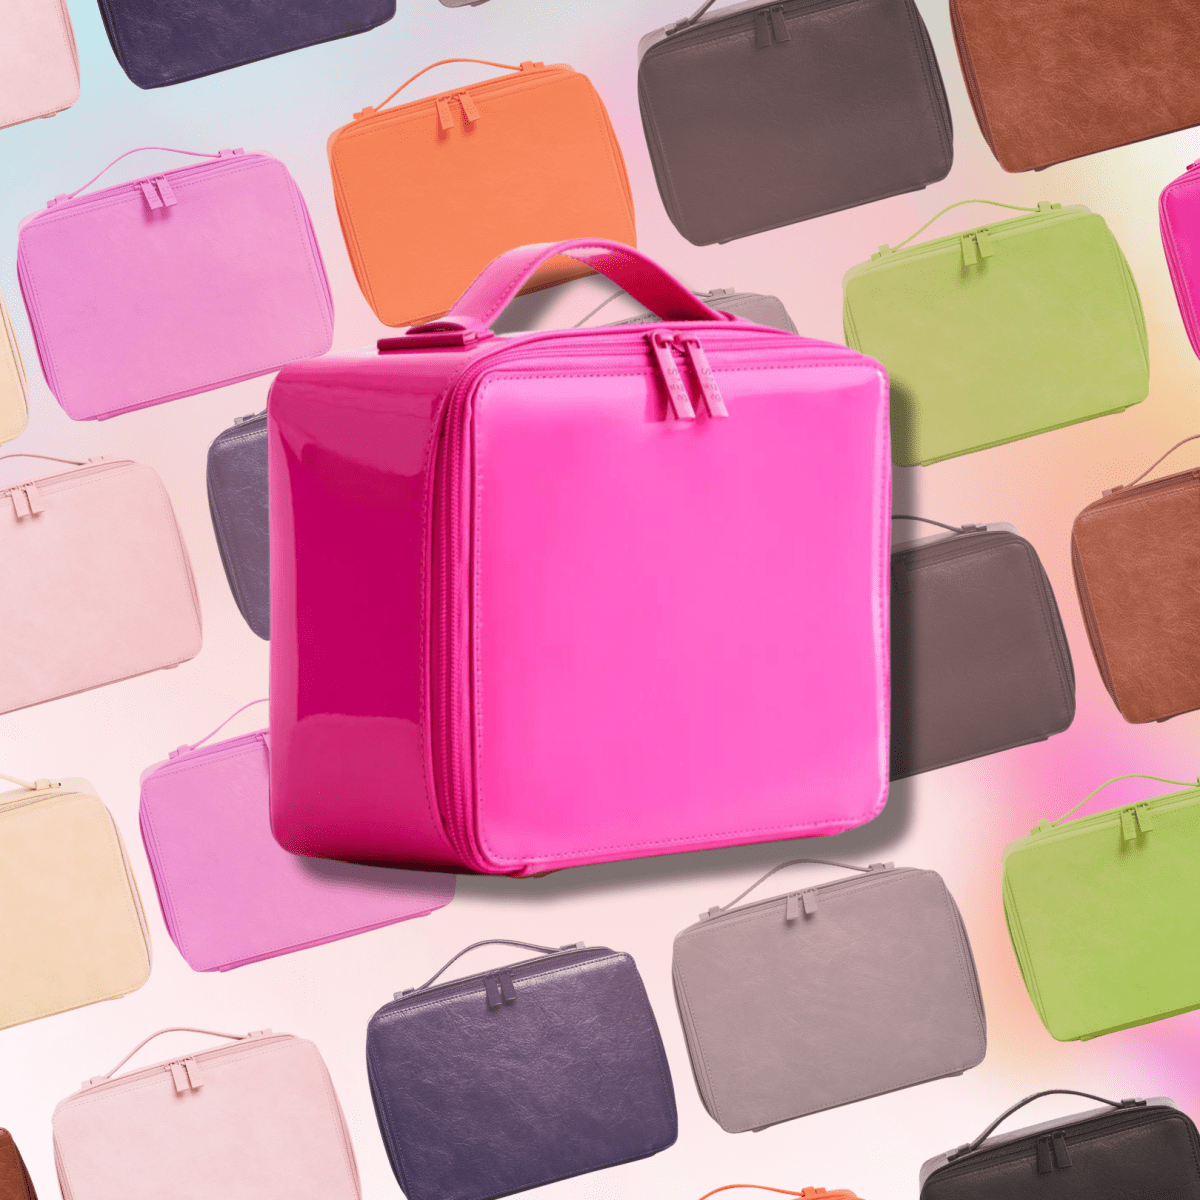 The 11 Best Toiletry Bags, According to Reviews